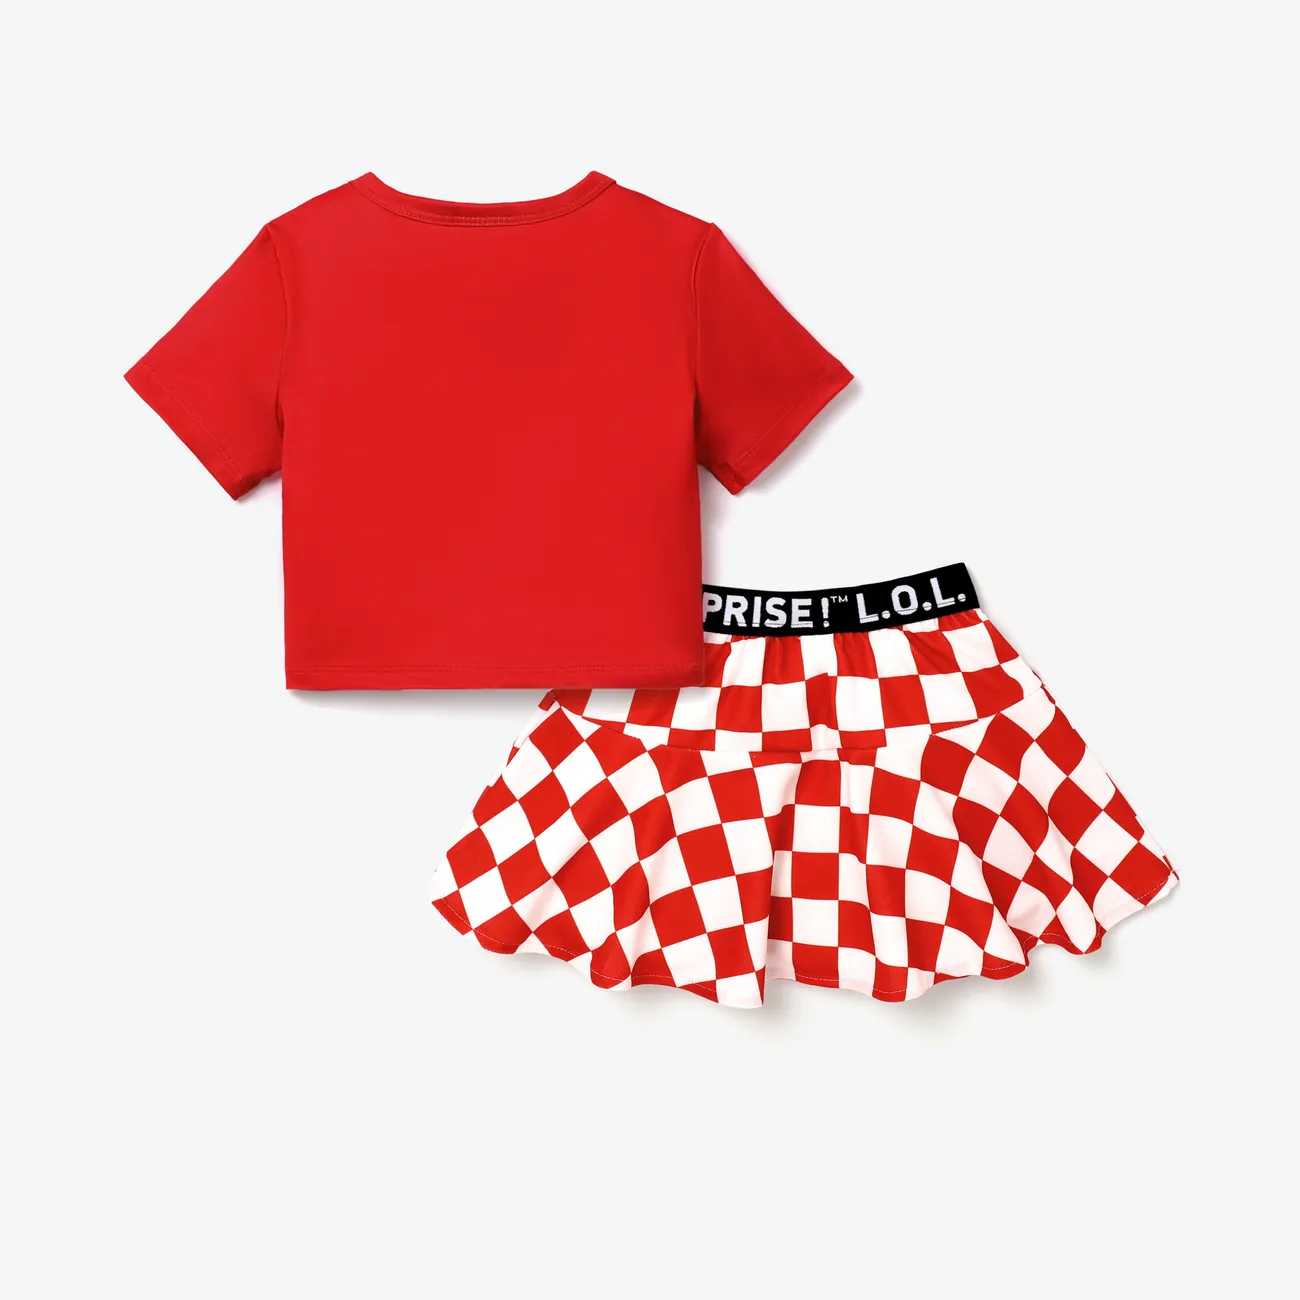 L.O.L. SURPRISE! Toddler Girl/Kid Girl Graphic Print Short-sleeve Tee and Skirt REDWHITE big image 1